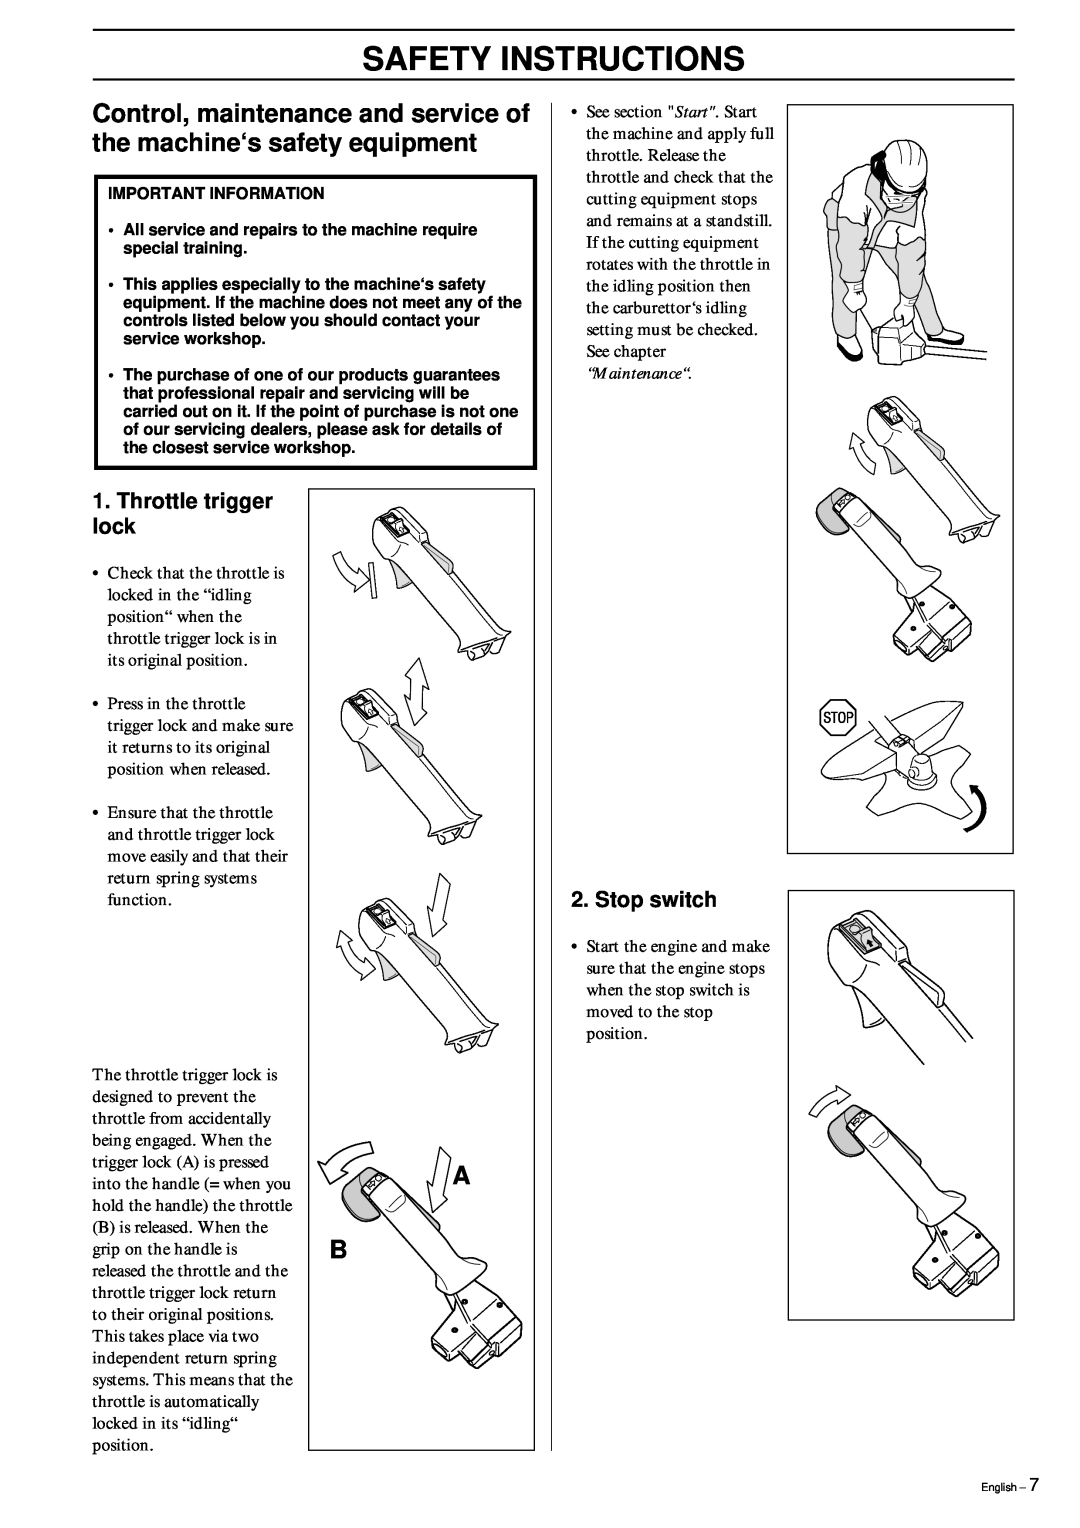 Husqvarna 245 RX, 245R/RX manual Control, maintenance and service of the machine‘s safety equipment, Safety Instructions 